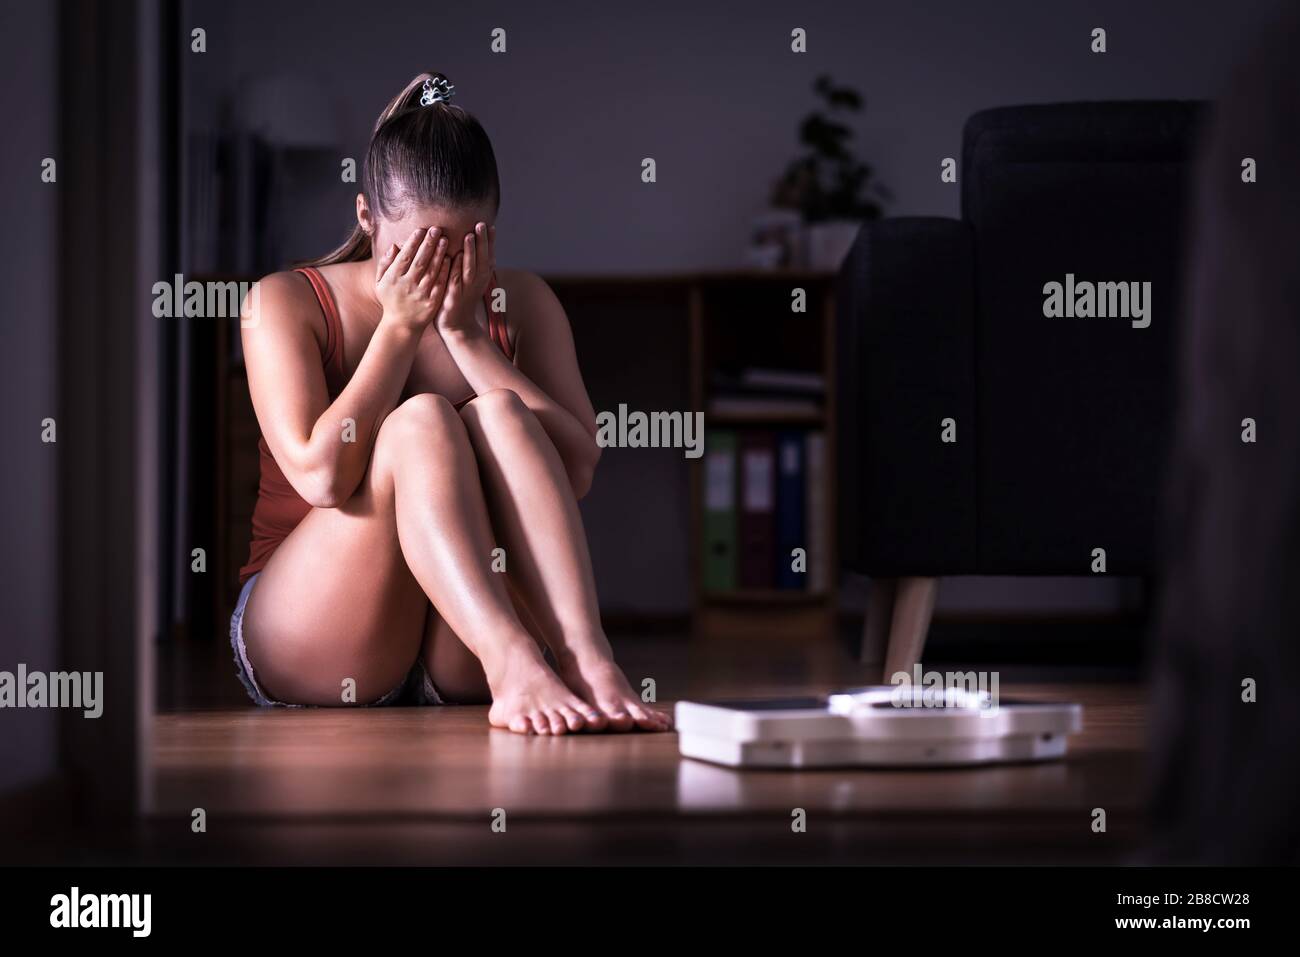 Woman having stress about weight loss, diet or gaining weight. Eating disorder, anorexia or bulimia concept. Young girl crying and sitting. Stock Photo